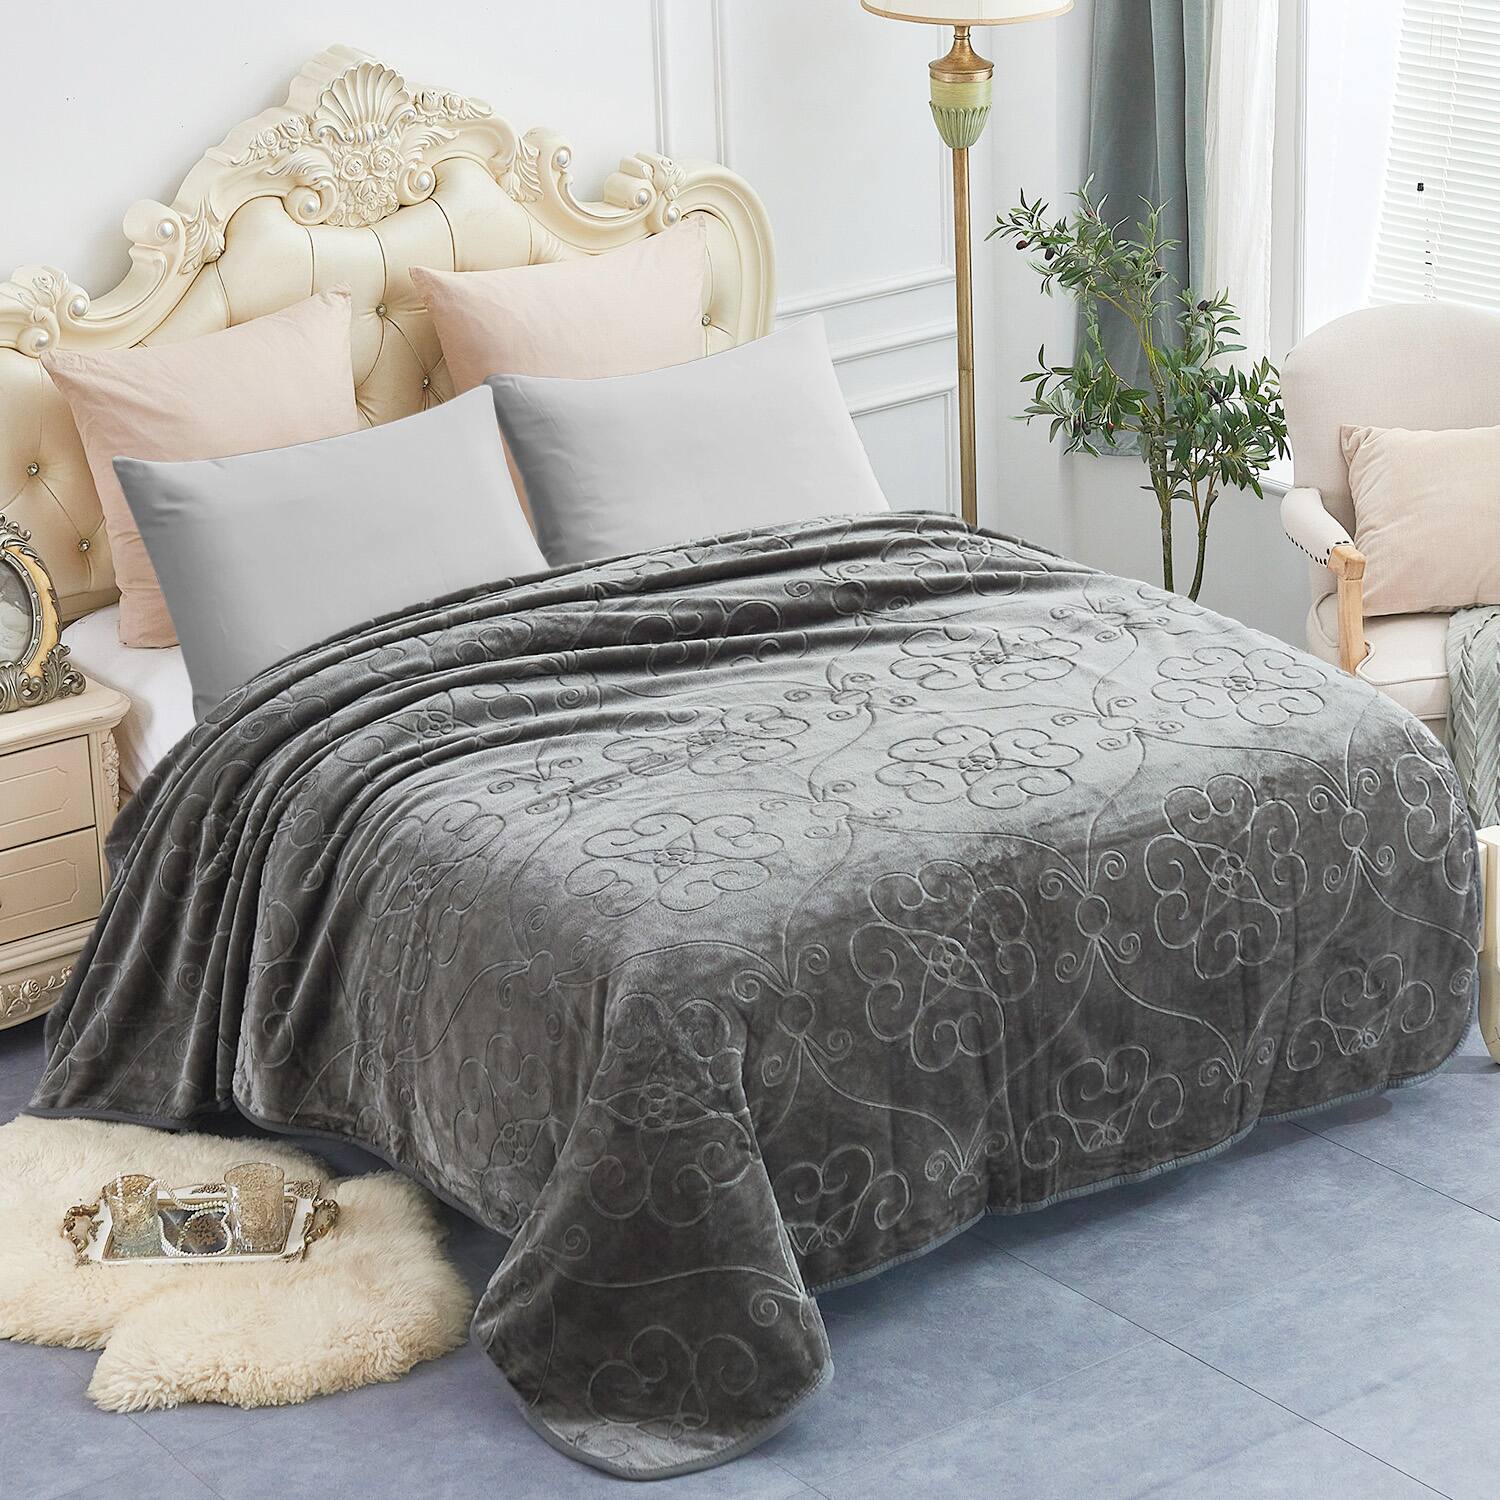 JML Plush Fleece Blanket Queen Size for $25.89 + Free Shipping w/ Prime or orders $25+